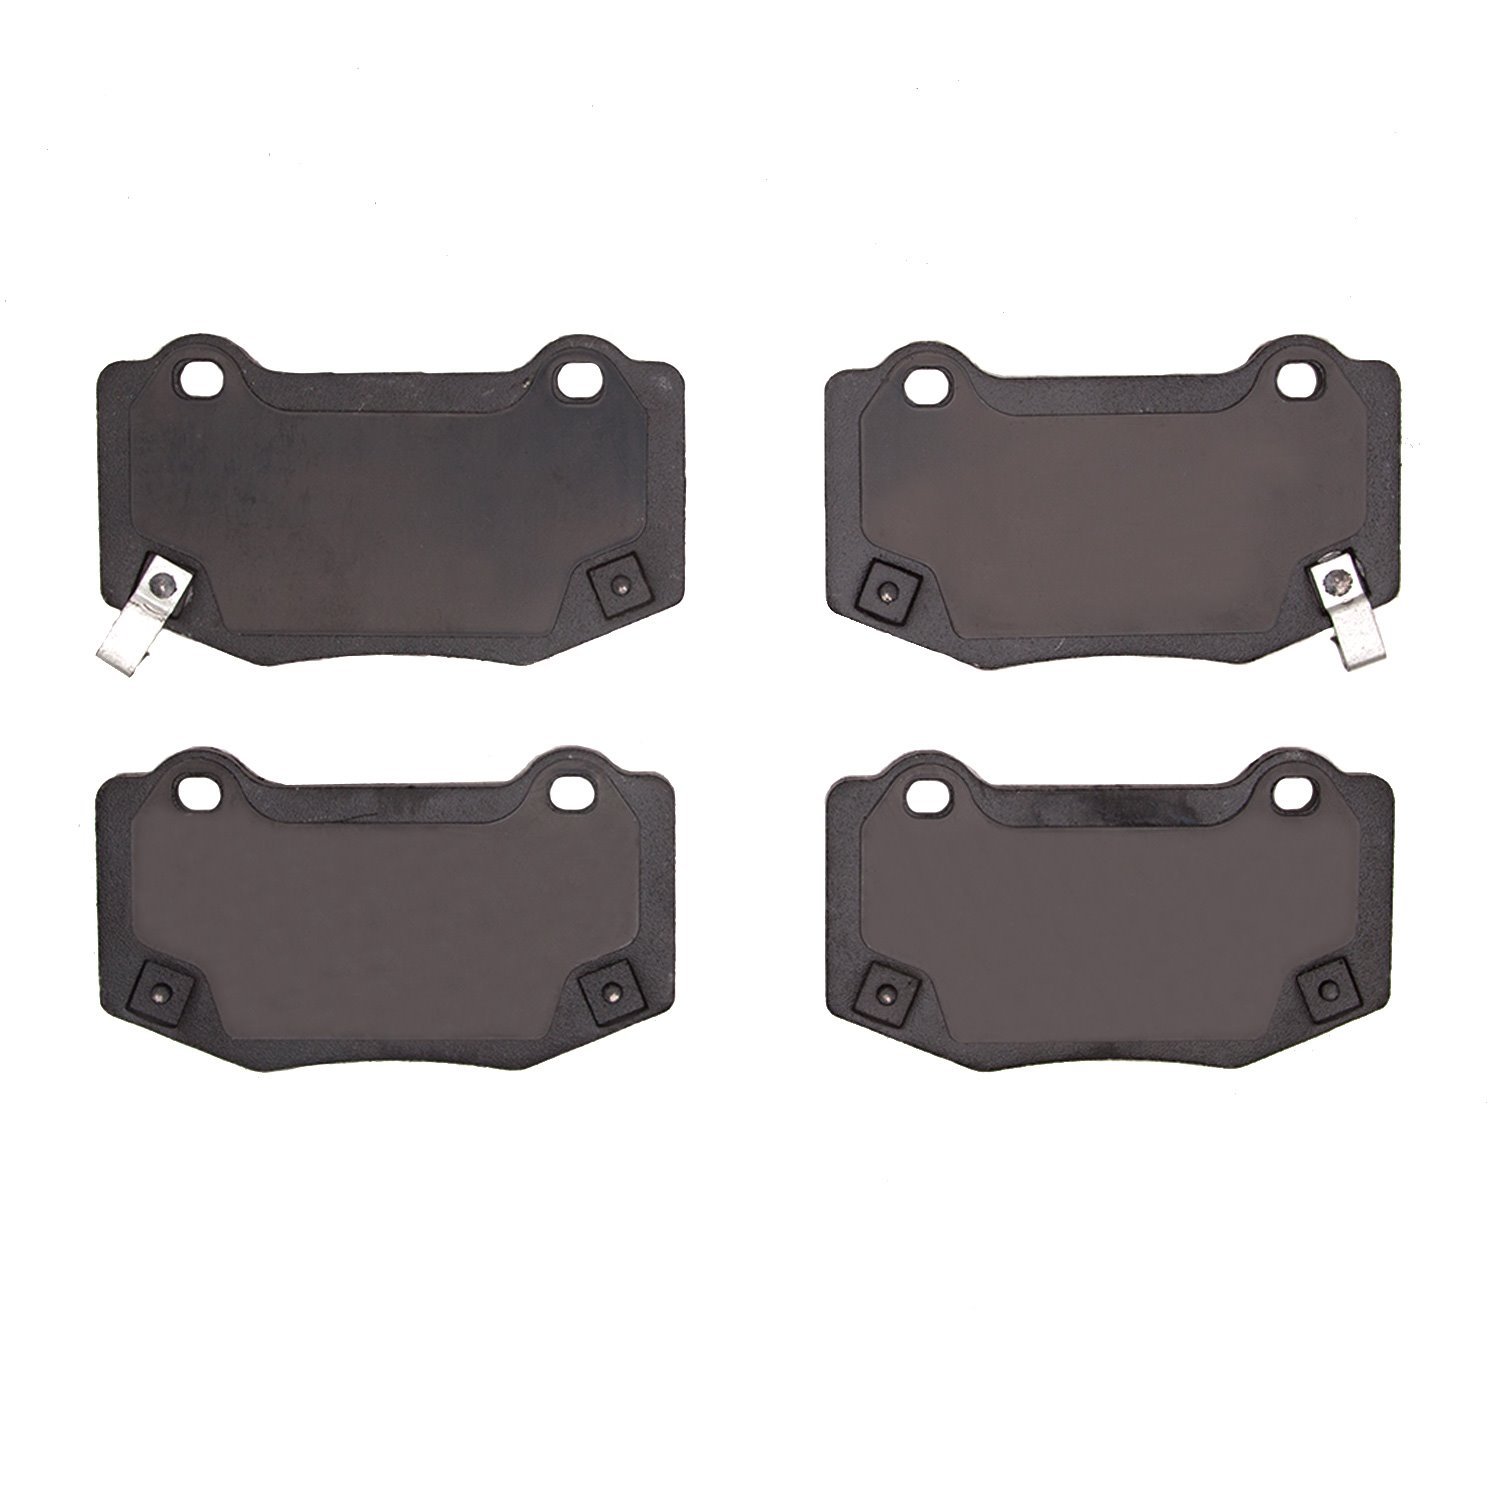 1600-1718-00 5000 Euro Ceramic Brake Pads, Fits Select GM, Position: Rear